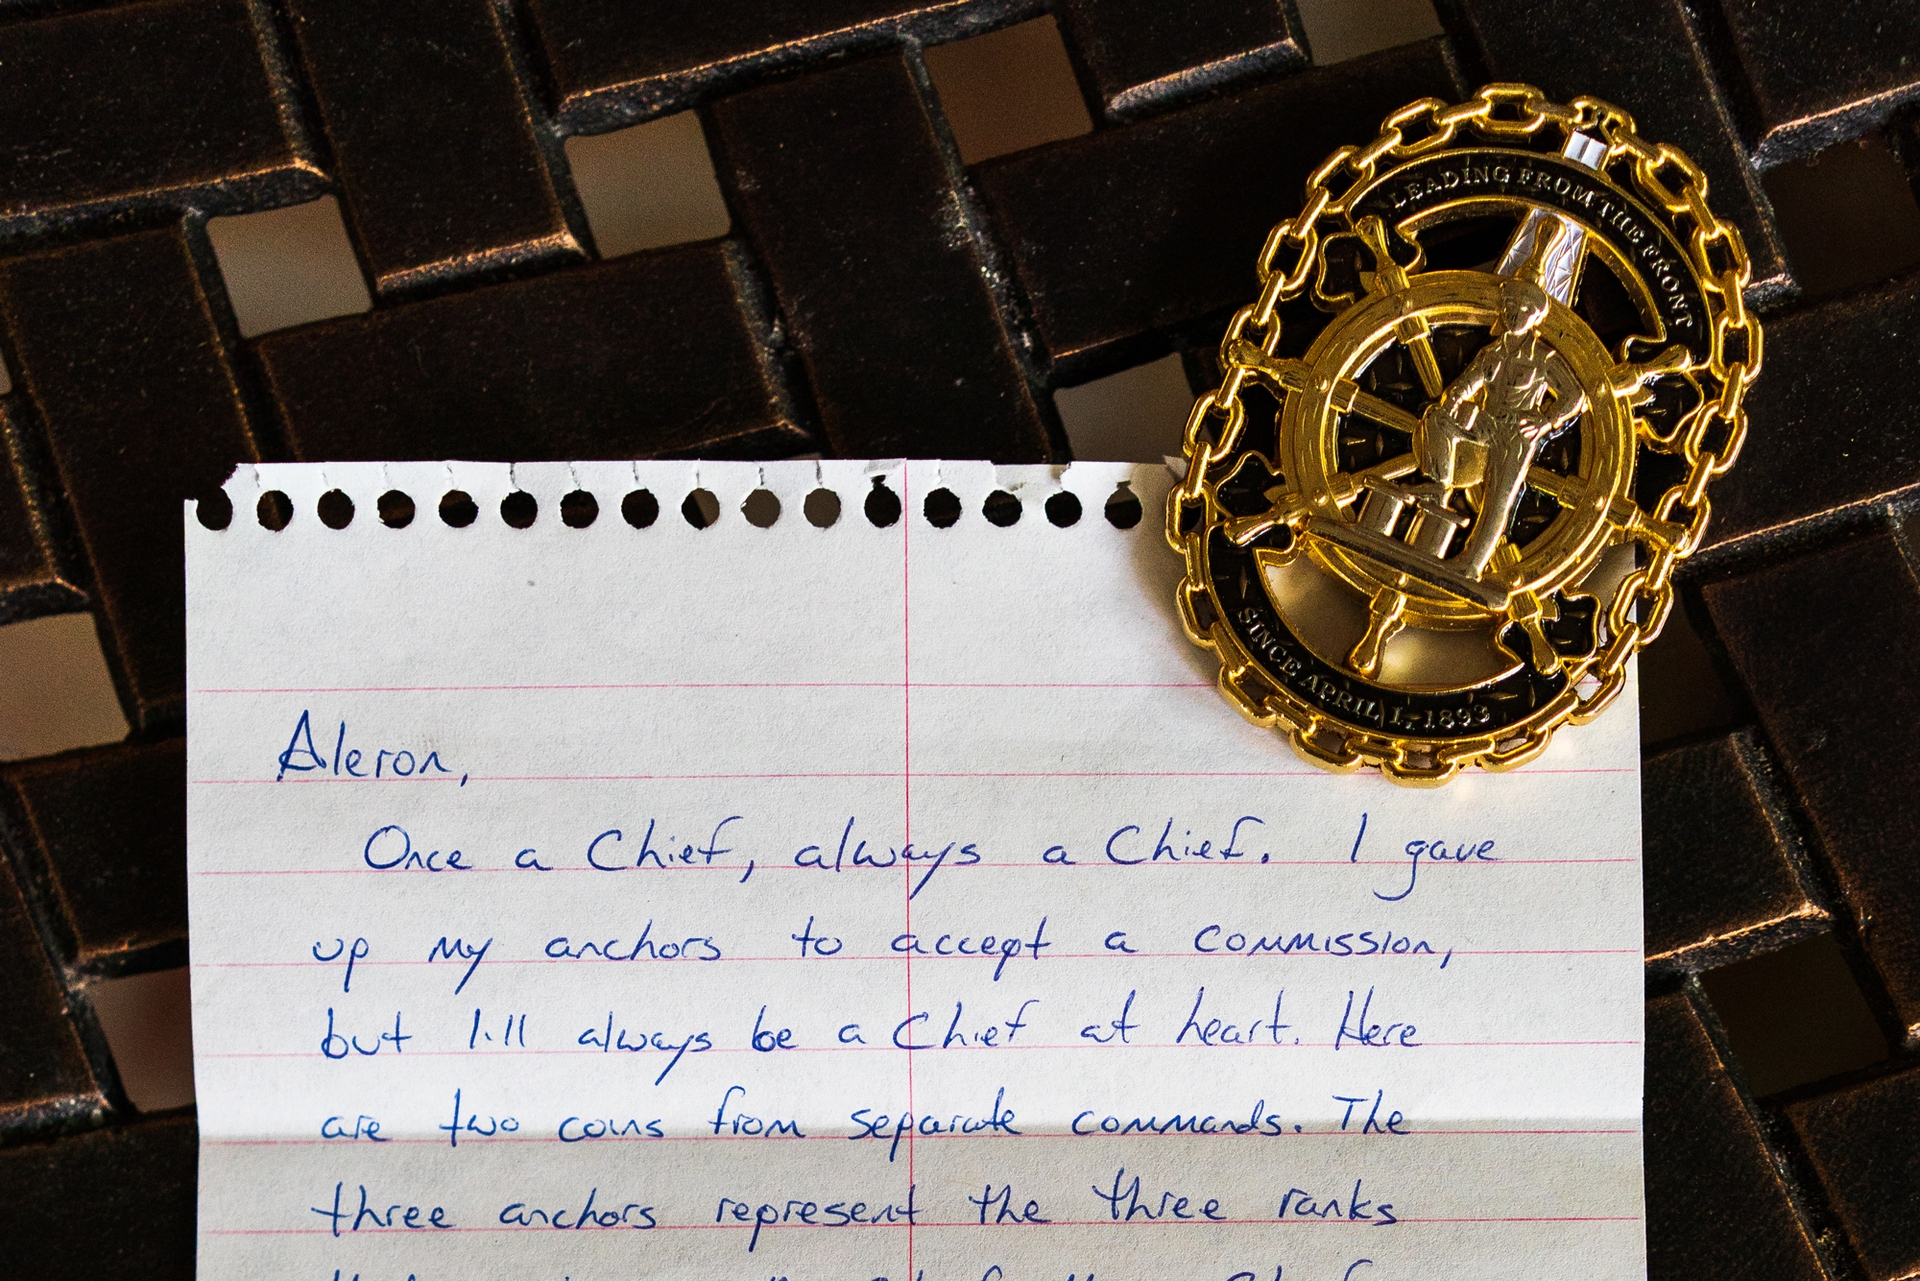 A handwritten fan letter to author Aleron Kong is shown with a military medal.